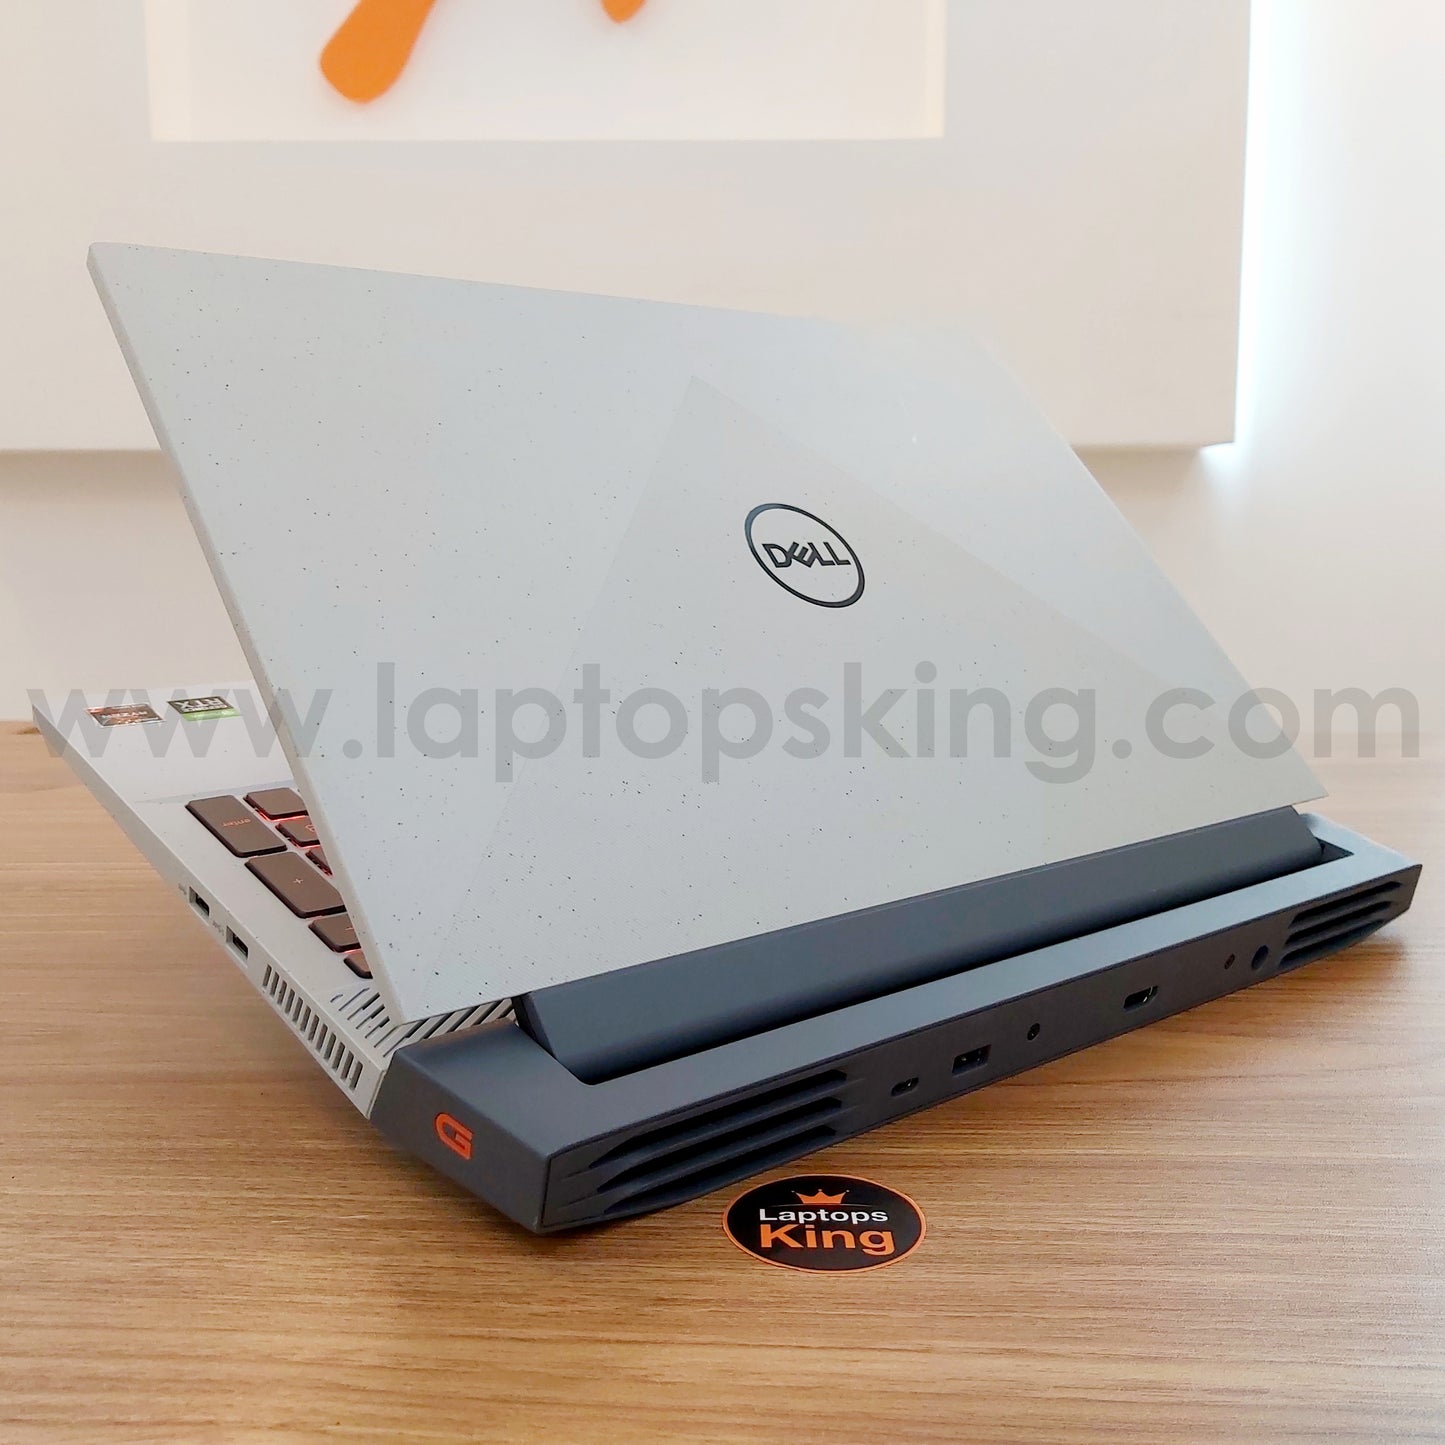 Dell G15 5515 Ryzen 7 5800h Rtx 3060 165hz Gaming Laptop Offers (New Open Box) Gaming laptop, Graphic Design laptop, best laptop for gaming, Best laptop for graphic design, computer for sale Lebanon, laptop for video editing in Lebanon, laptop for sale Lebanon, Best graphic design laptop,	Best video editing laptop, Best programming laptop, laptop for sale in Lebanon, laptops for sale in Lebanon, laptop for sale in Lebanon, buy computer Lebanon, buy laptop Lebanon.